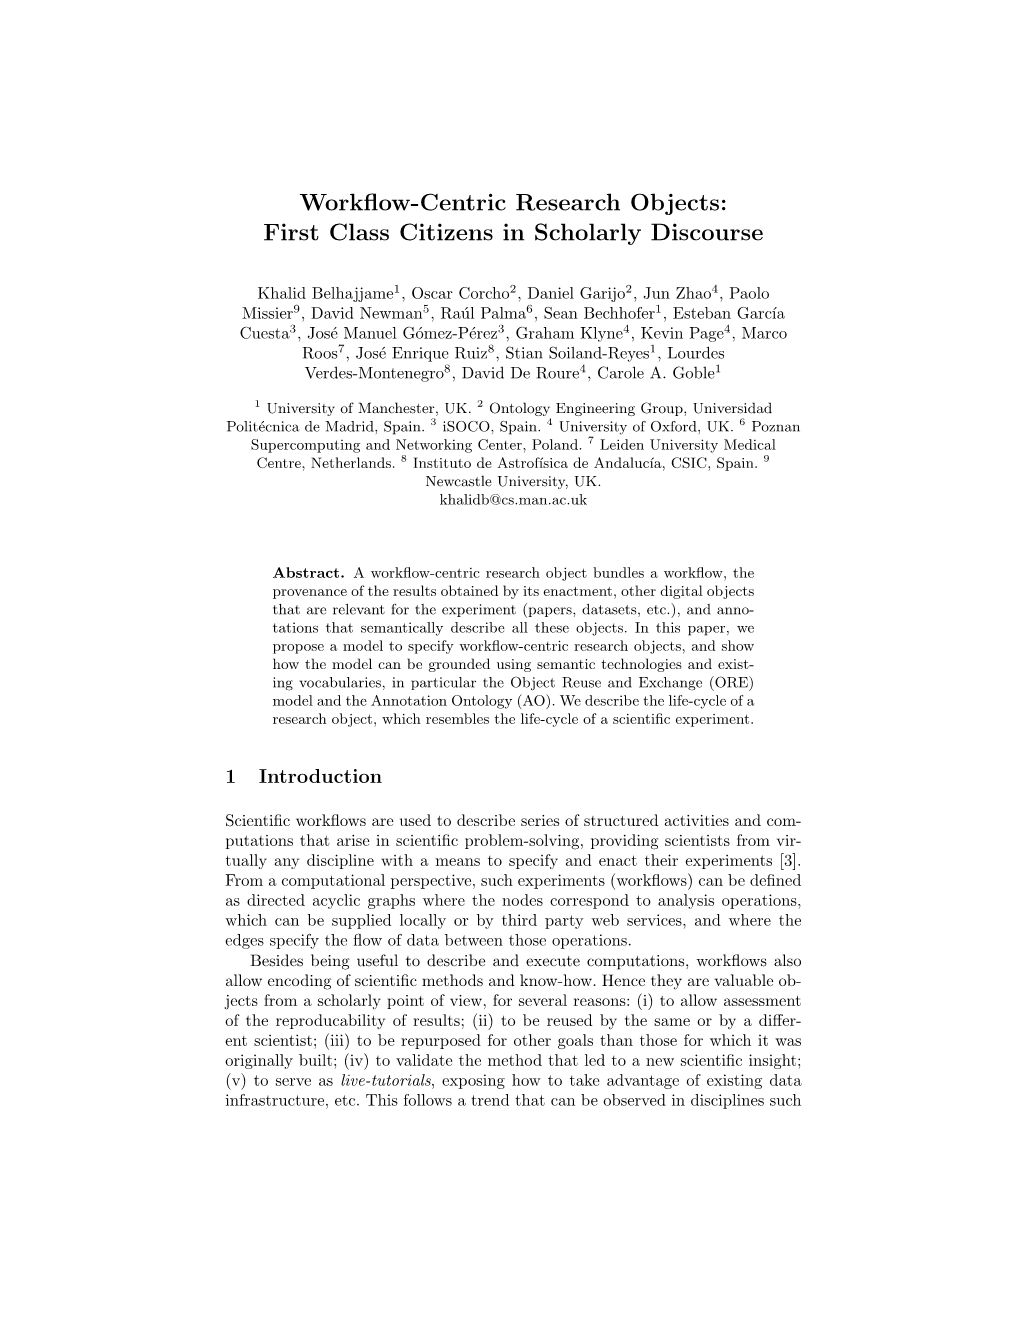 Workflow-Centric Research Objects: First Class Citizens in Scholarly